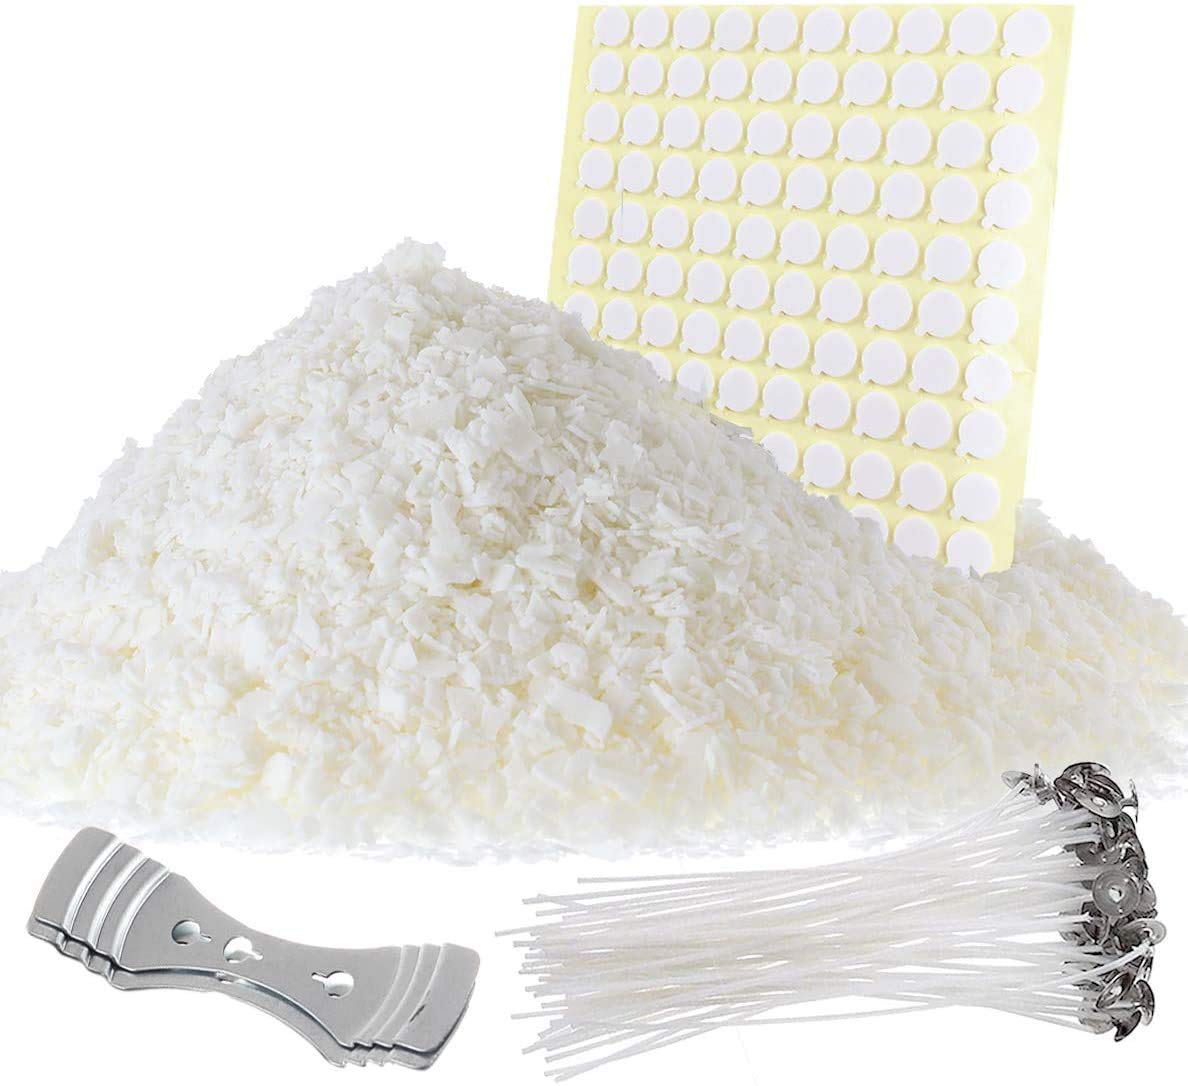 Etienne Alair Natural Soy Wax Kit - Includes; 10 Lbs Soy Candle Wax Flakes, 100 Cotton Wicks, 2 Wick Holders.